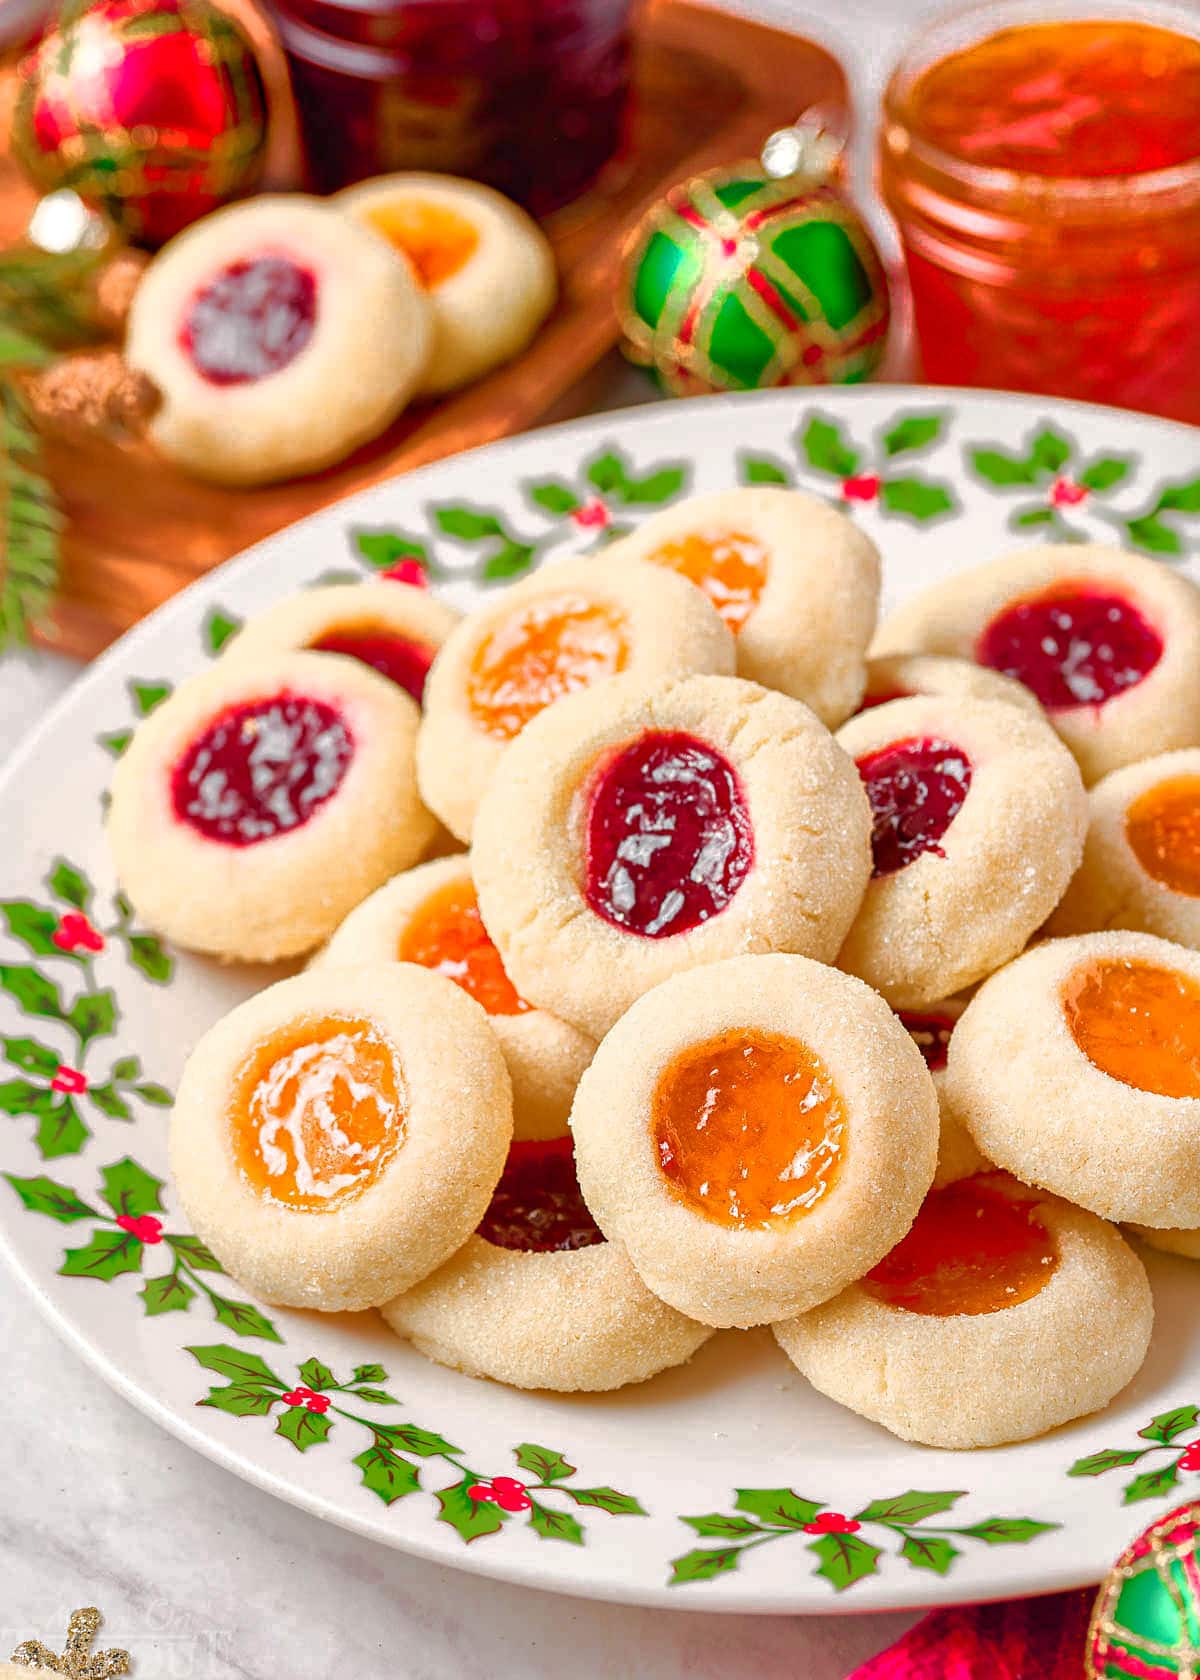 christmas plate piled high with thumbprint cookies filled with apricot and raspberry jam.